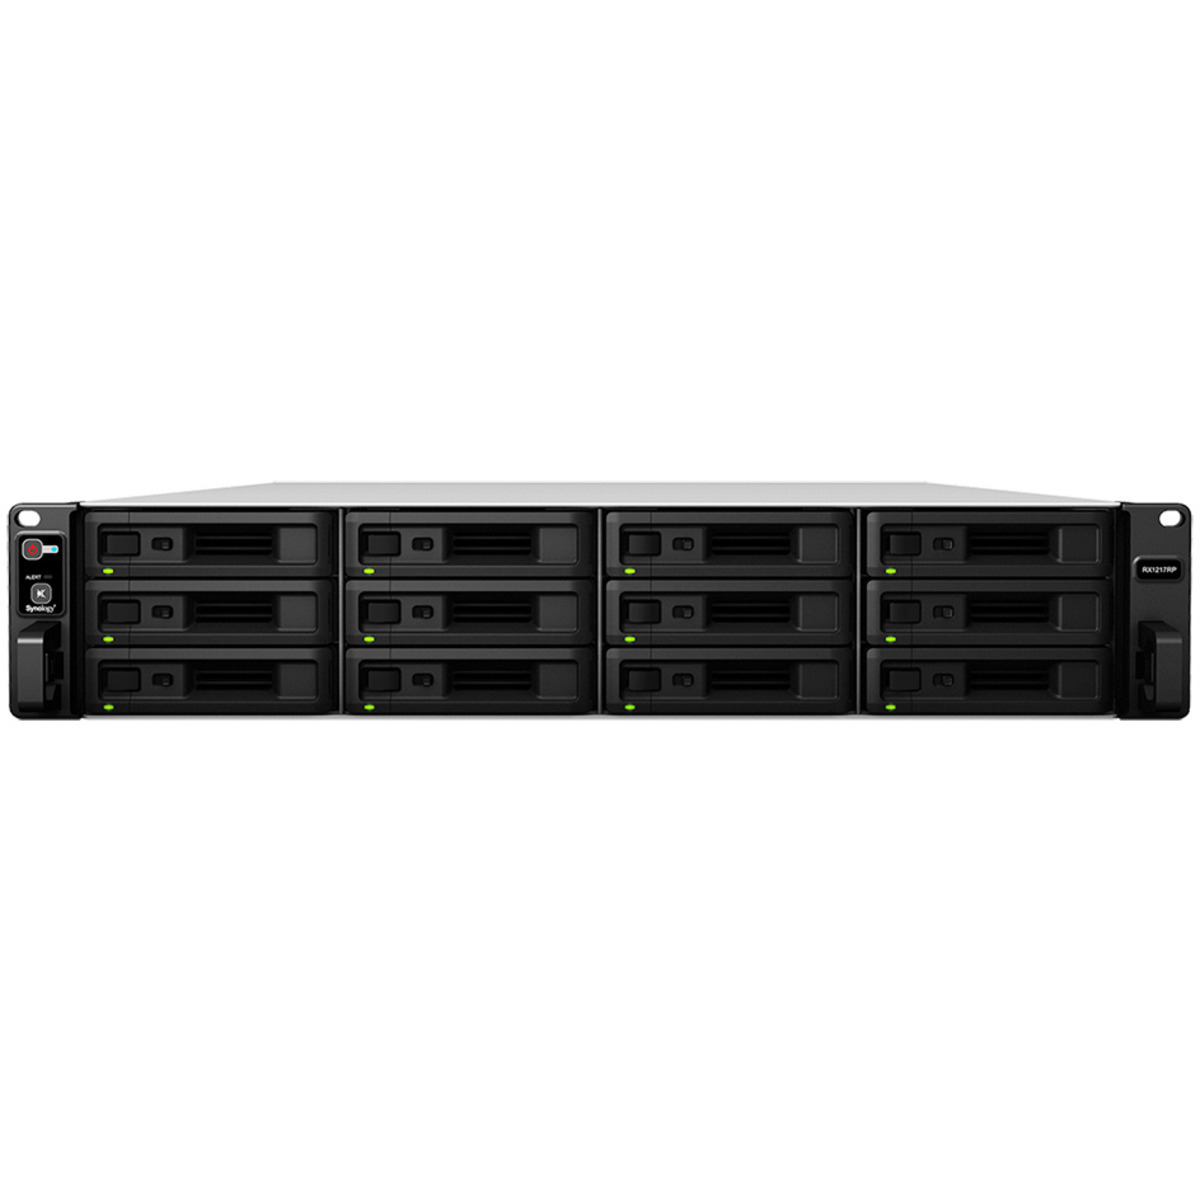 Synology RX1217RP External Expansion Drive 56tb 12-Bay RackMount Large Business / Enterprise Expansion Enclosure 7x8tb Synology Plus Series HAT3310-8T 3.5 7200rpm SATA 6Gb/s HDD NAS Class Drives Installed - Burn-In Tested RX1217RP External Expansion Drive